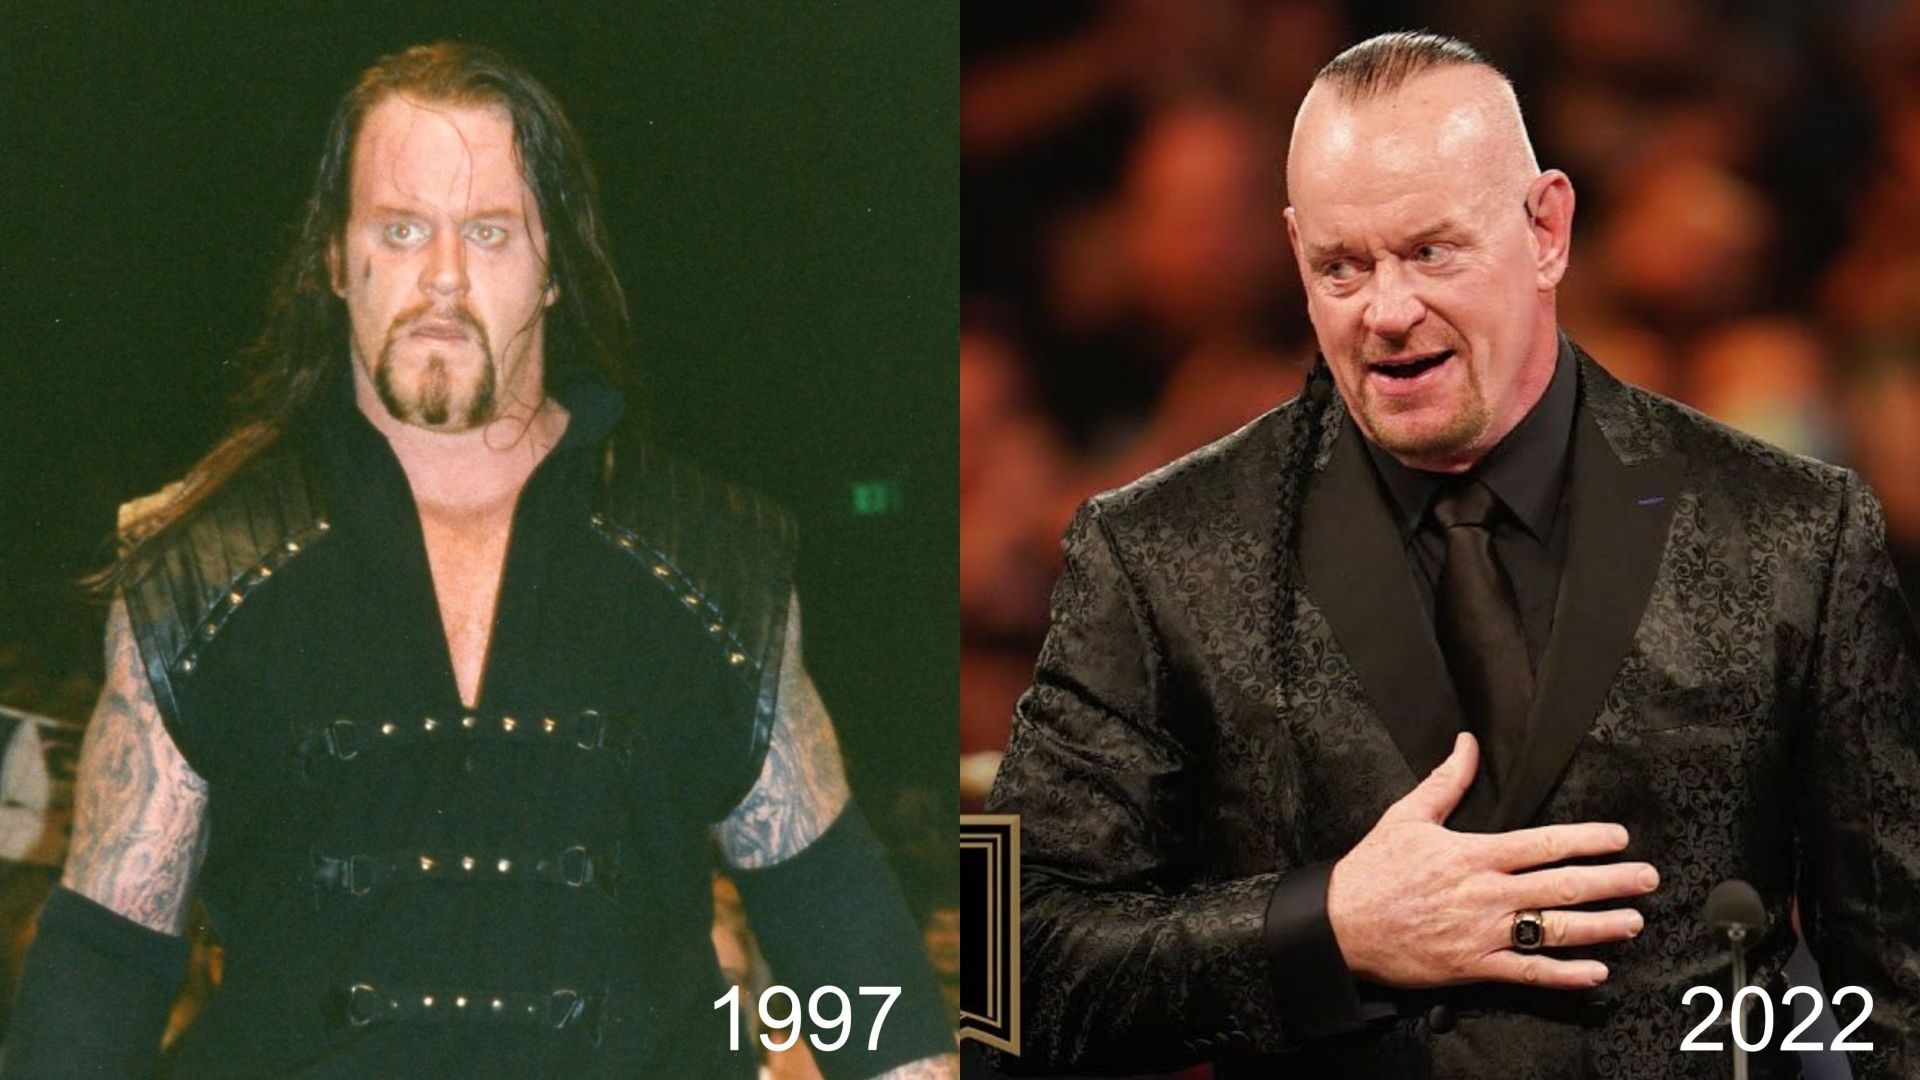 Undertaker recently entered the Hall of Fame